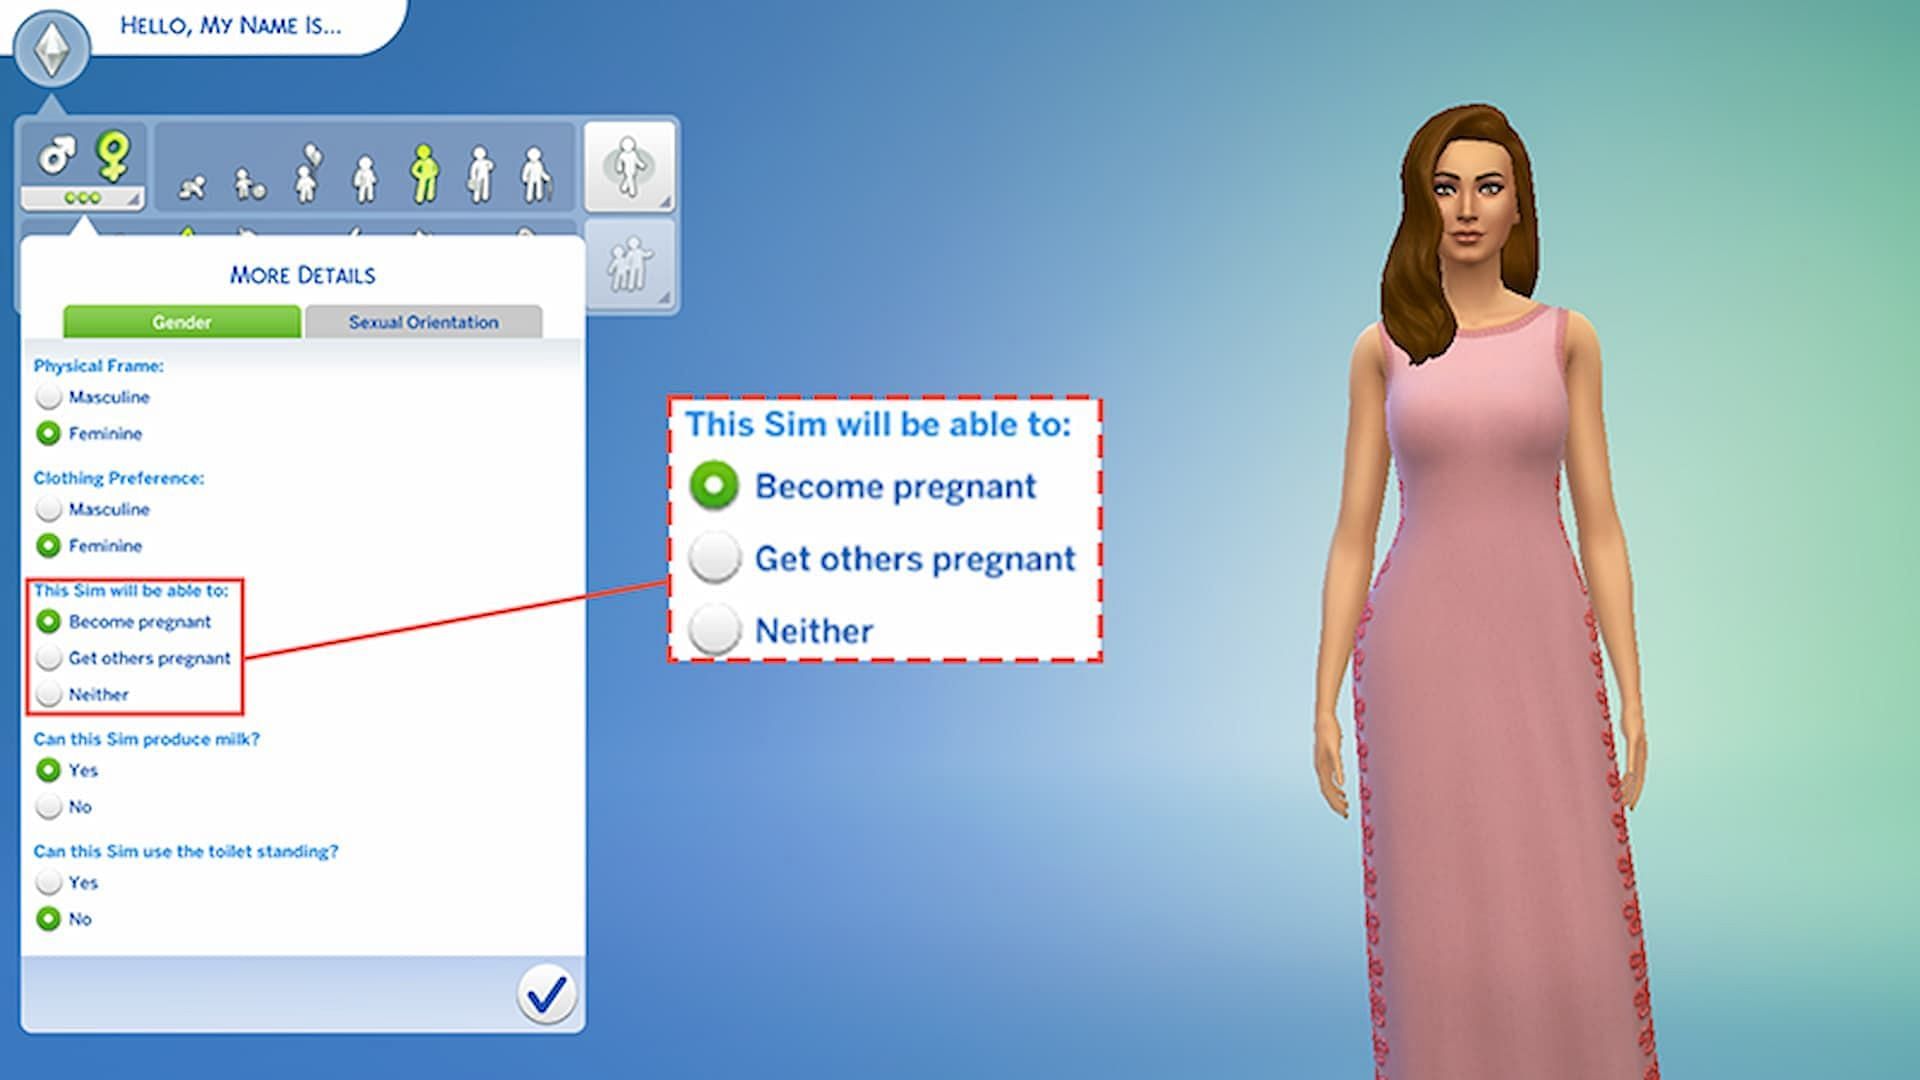 Sims 4 Pregnancy guide: How to give birth